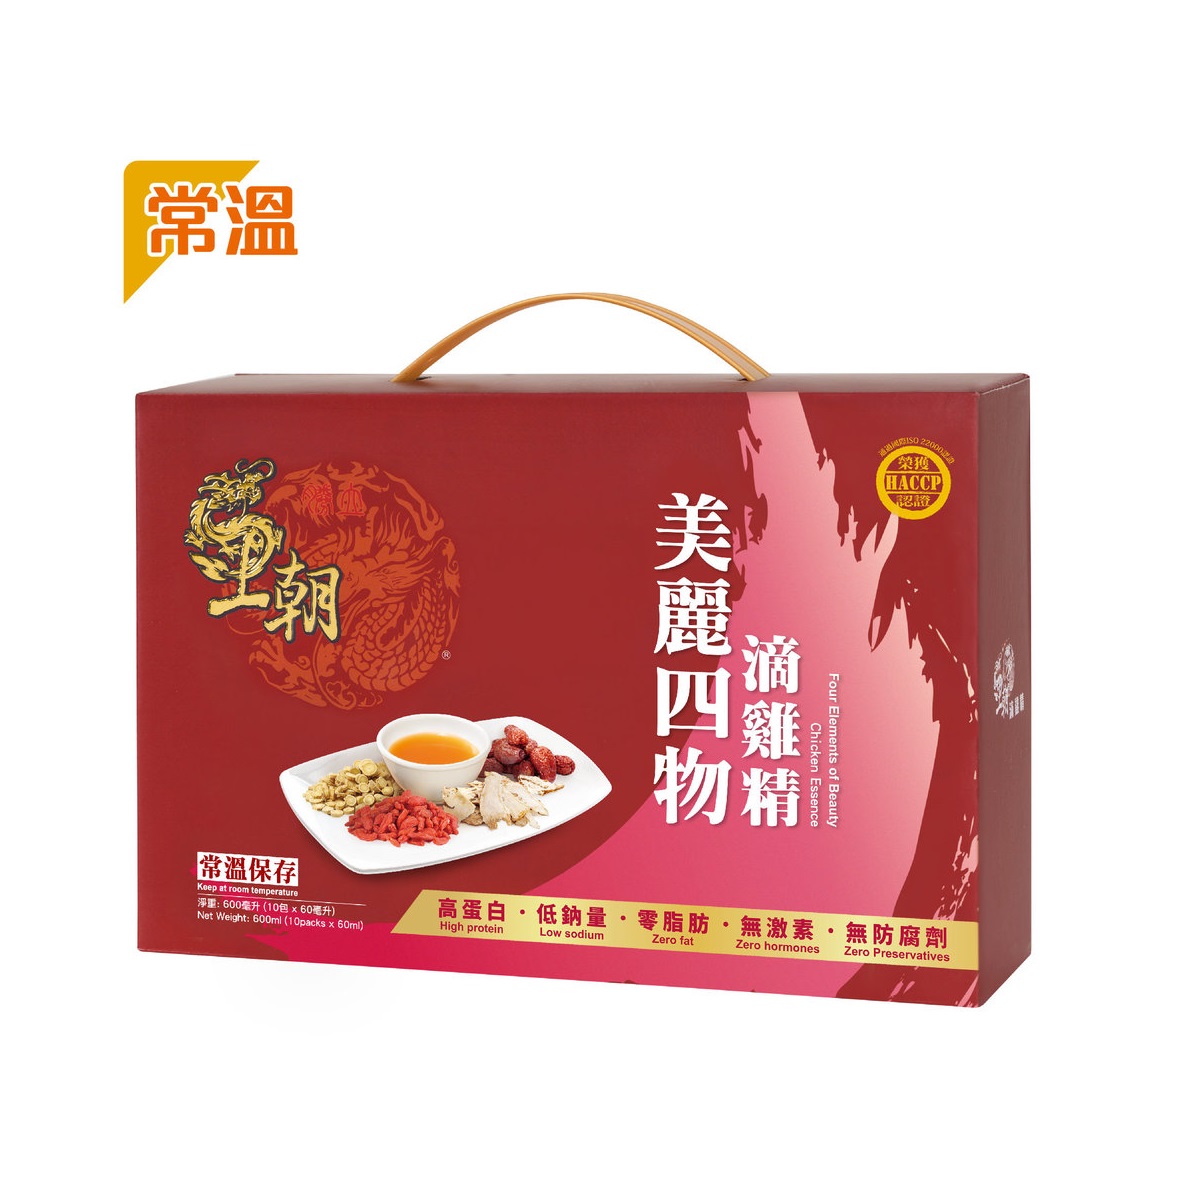 Wang Chao Chicken Essence (Four Element of Beauty Flavor) (Ambient - 10 Packs) Budle of 5